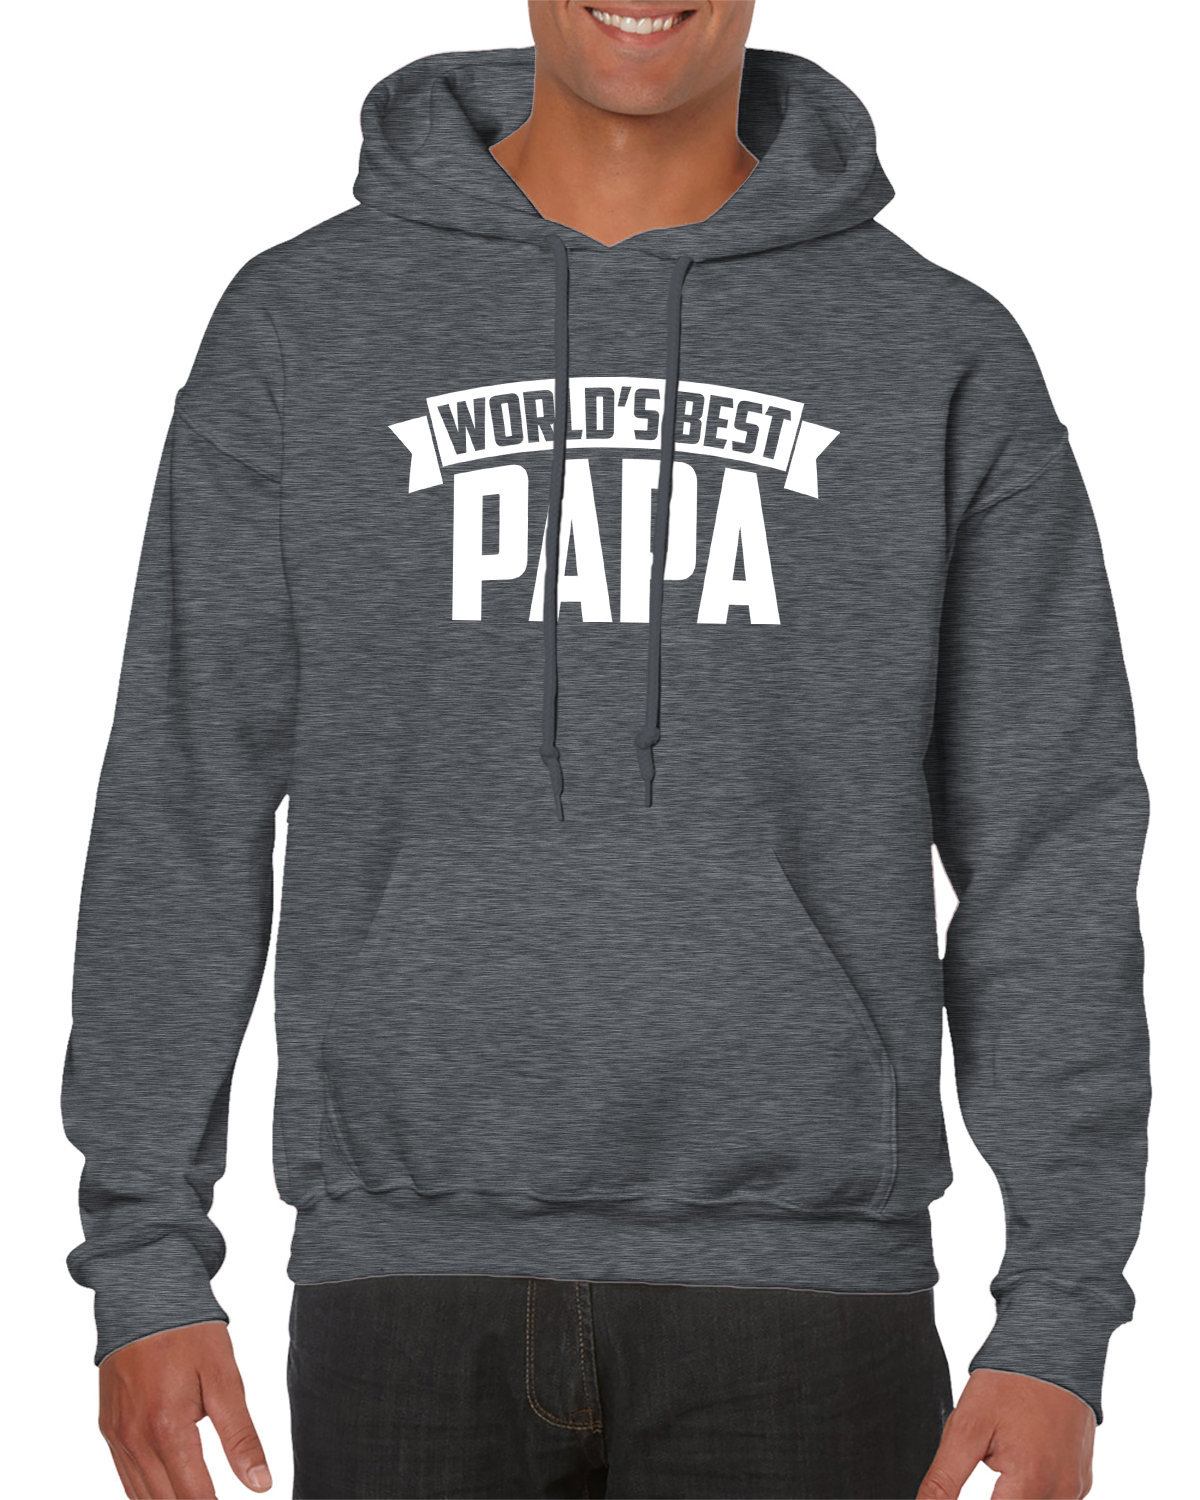 World's Best Papa Happy Father's Day Male Role Model Grandfather Poppa Pops  Funny Gag Gift Idea Present Men's Hoodie SF-0355 